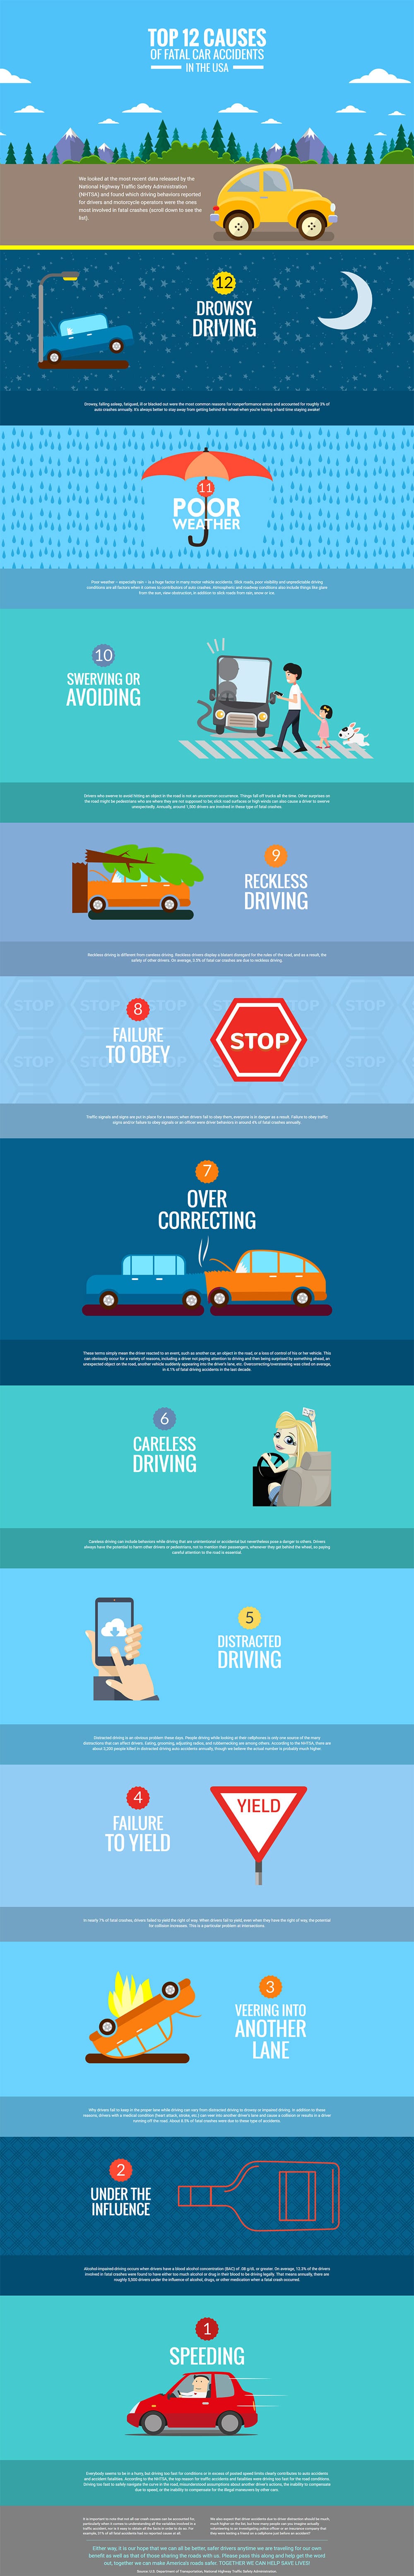 top12-causes-fatal-car-accidents